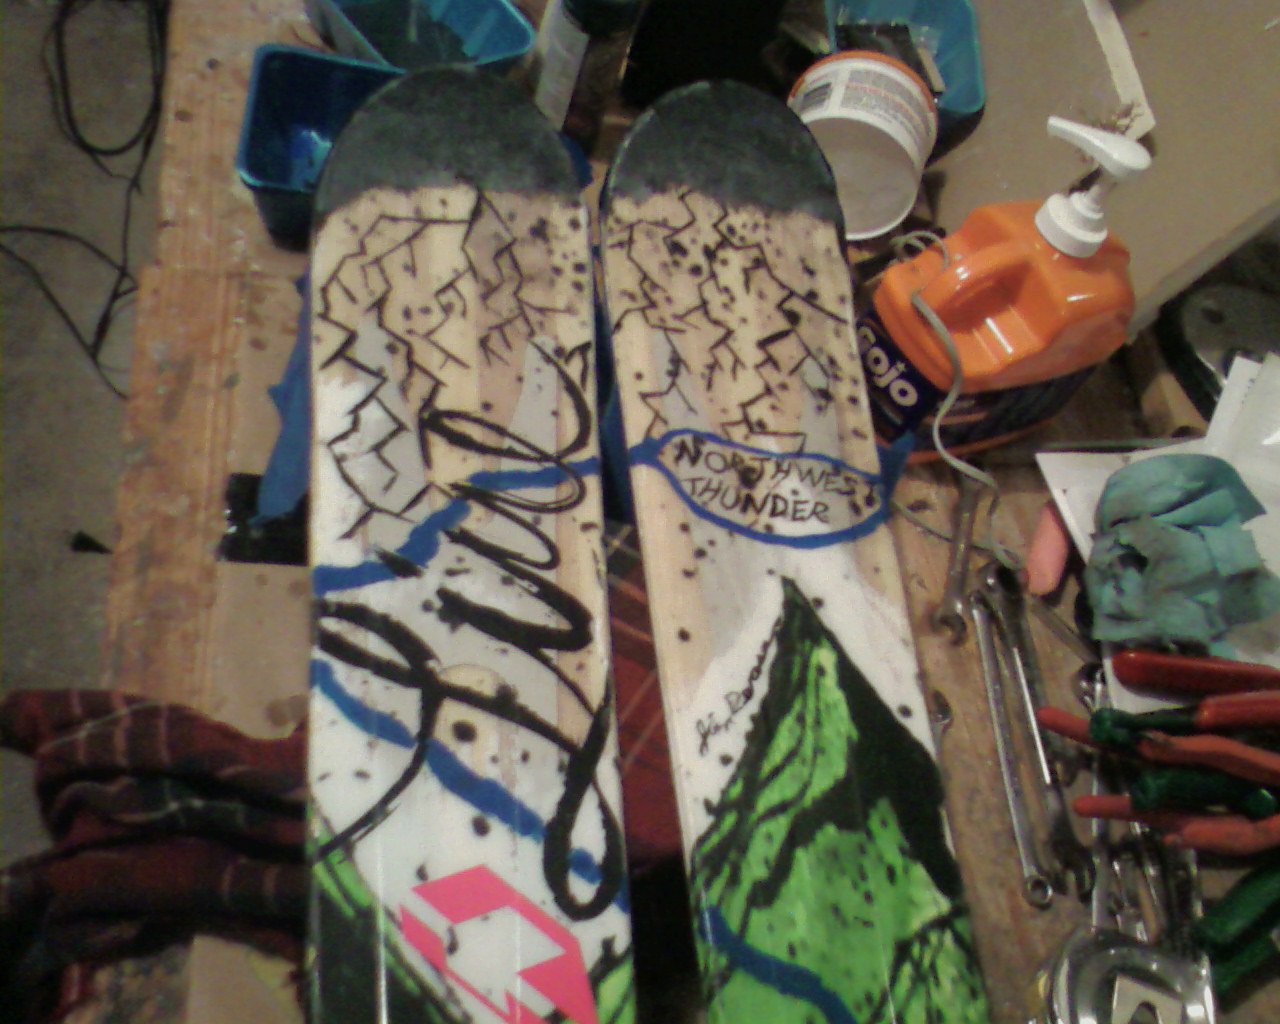 I painted my skis